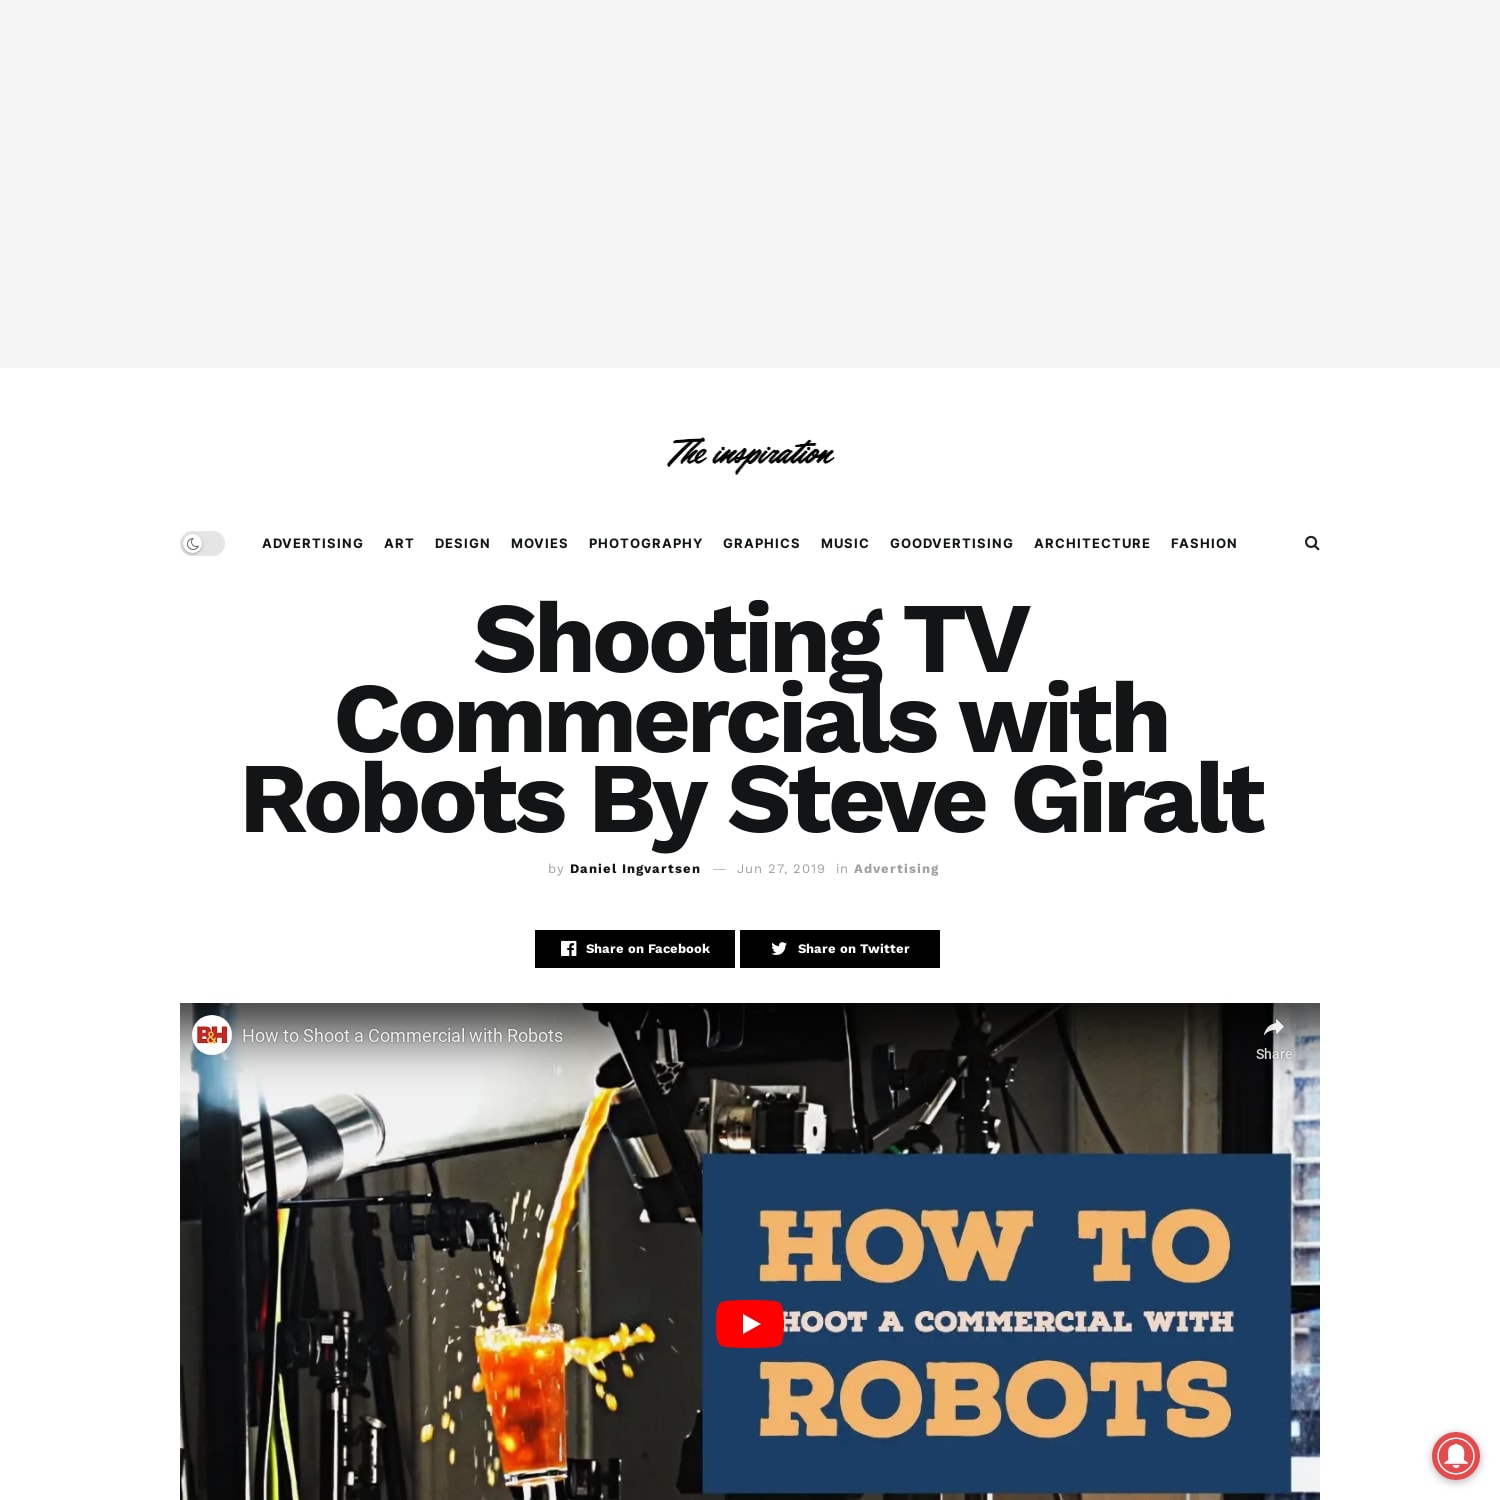 Shooting TV Commercials with Robots By Steve Giralt